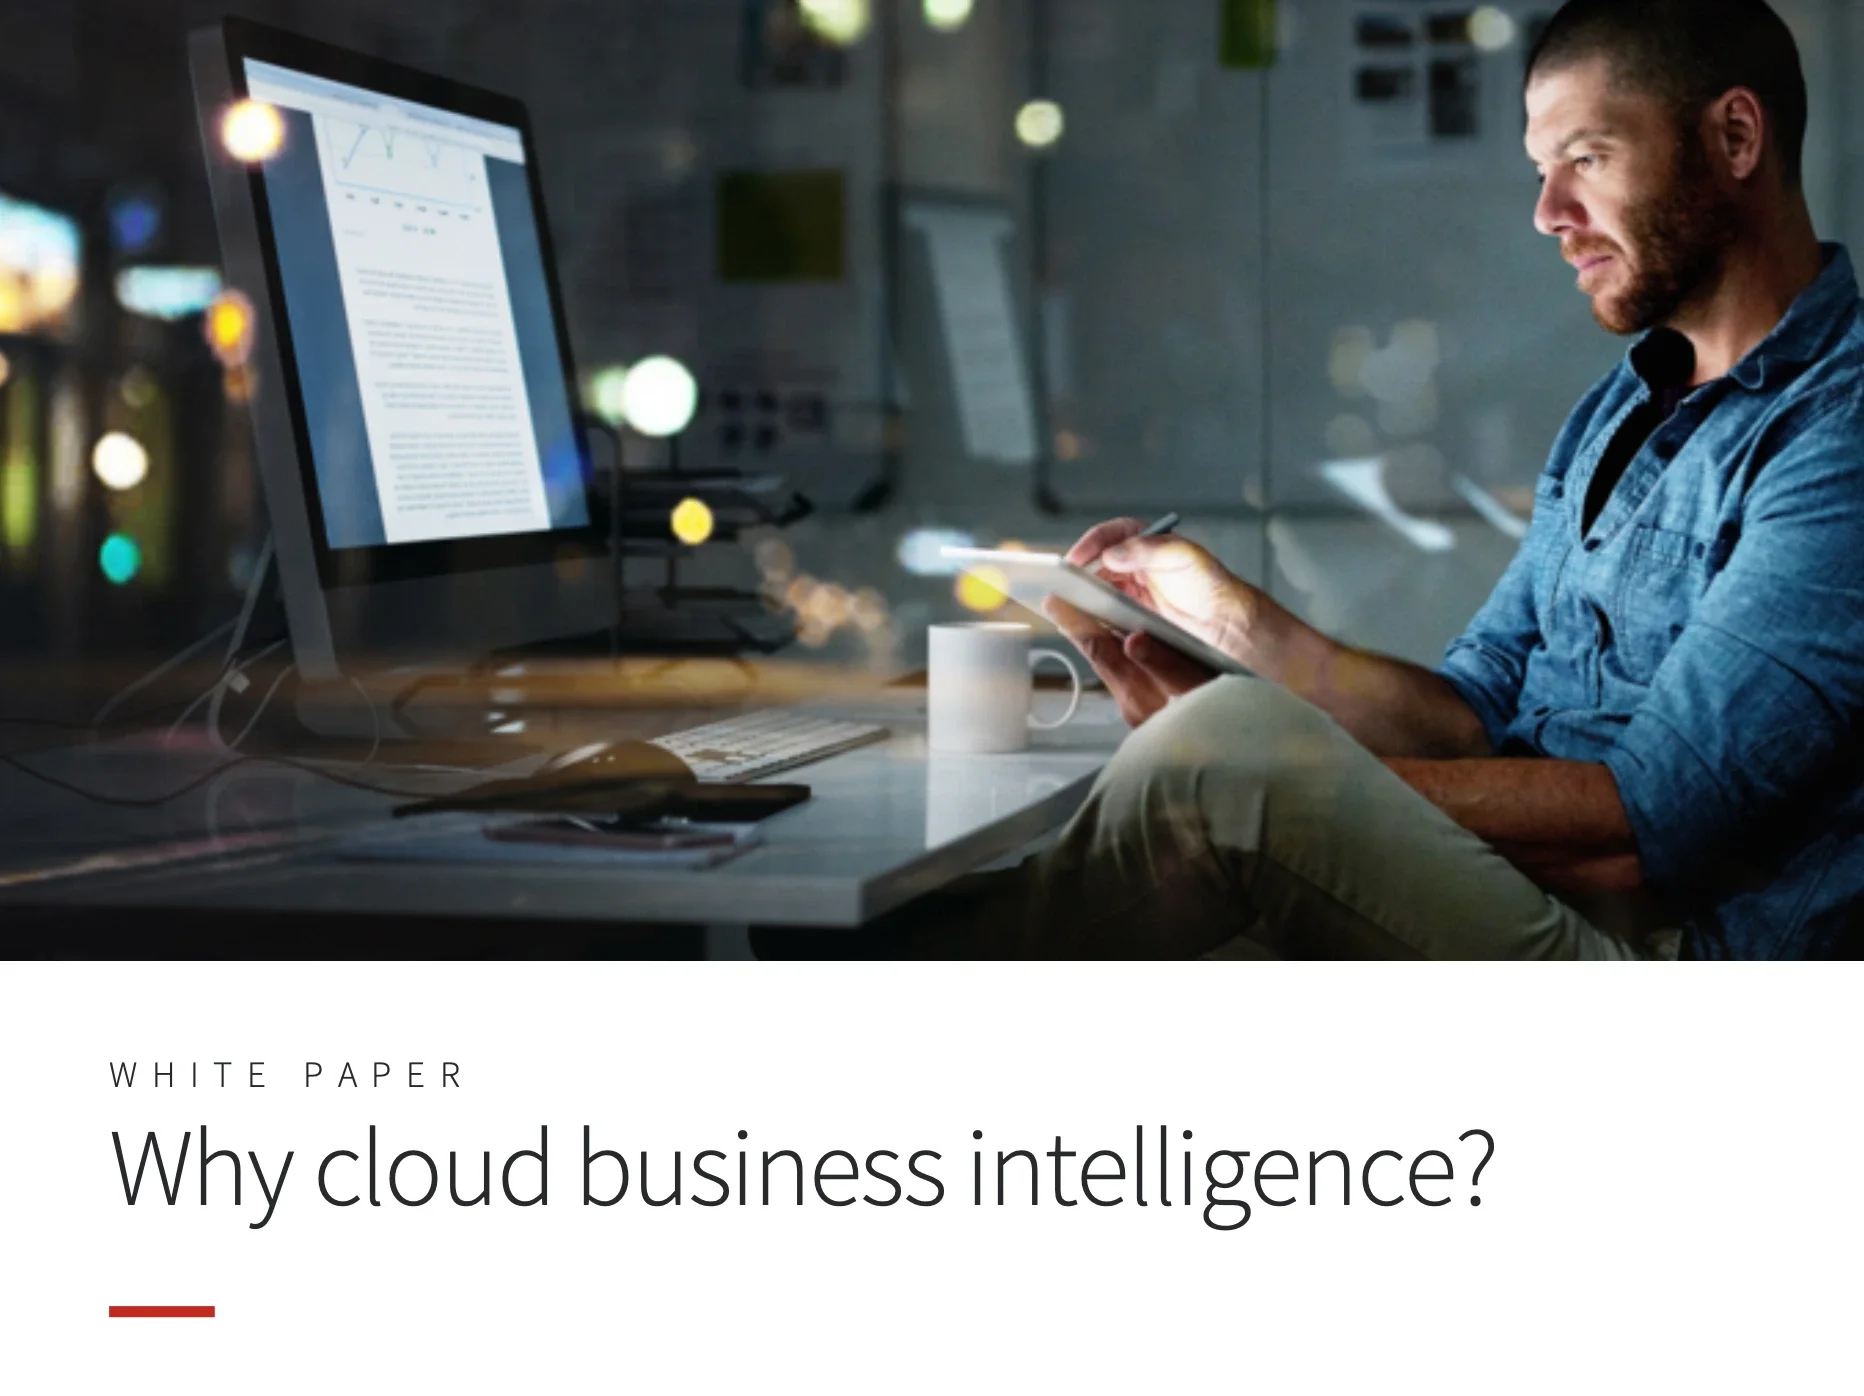 Why cloud business intelligence?